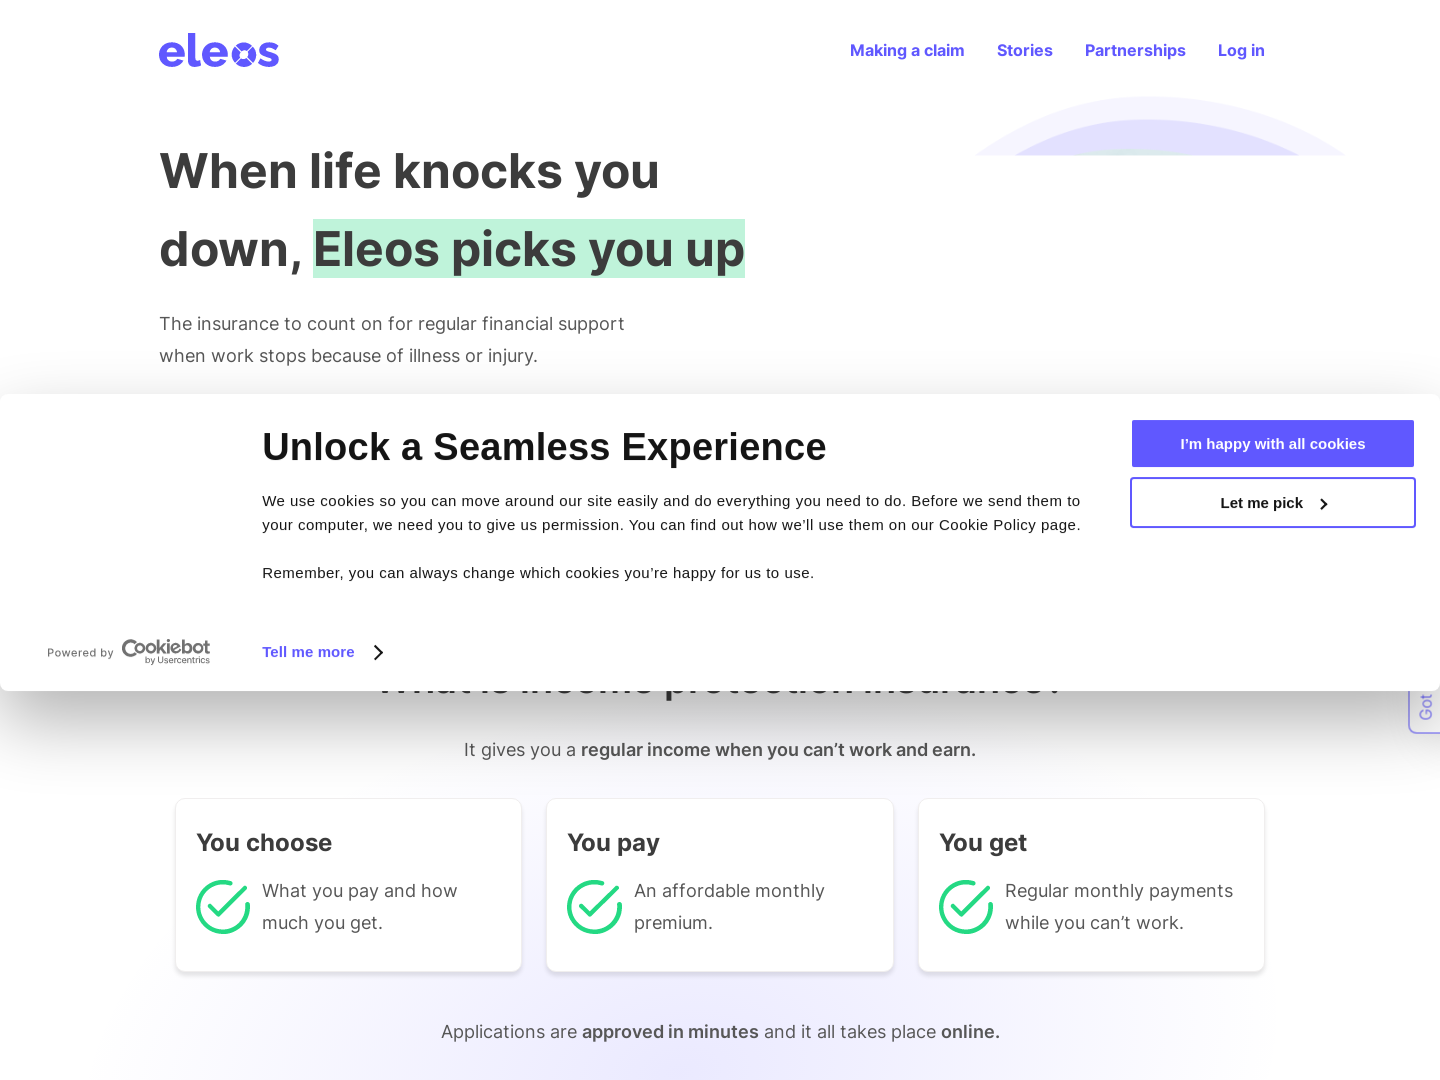 Eleos Secures $750,000 Funding to Democratize Insurance Access